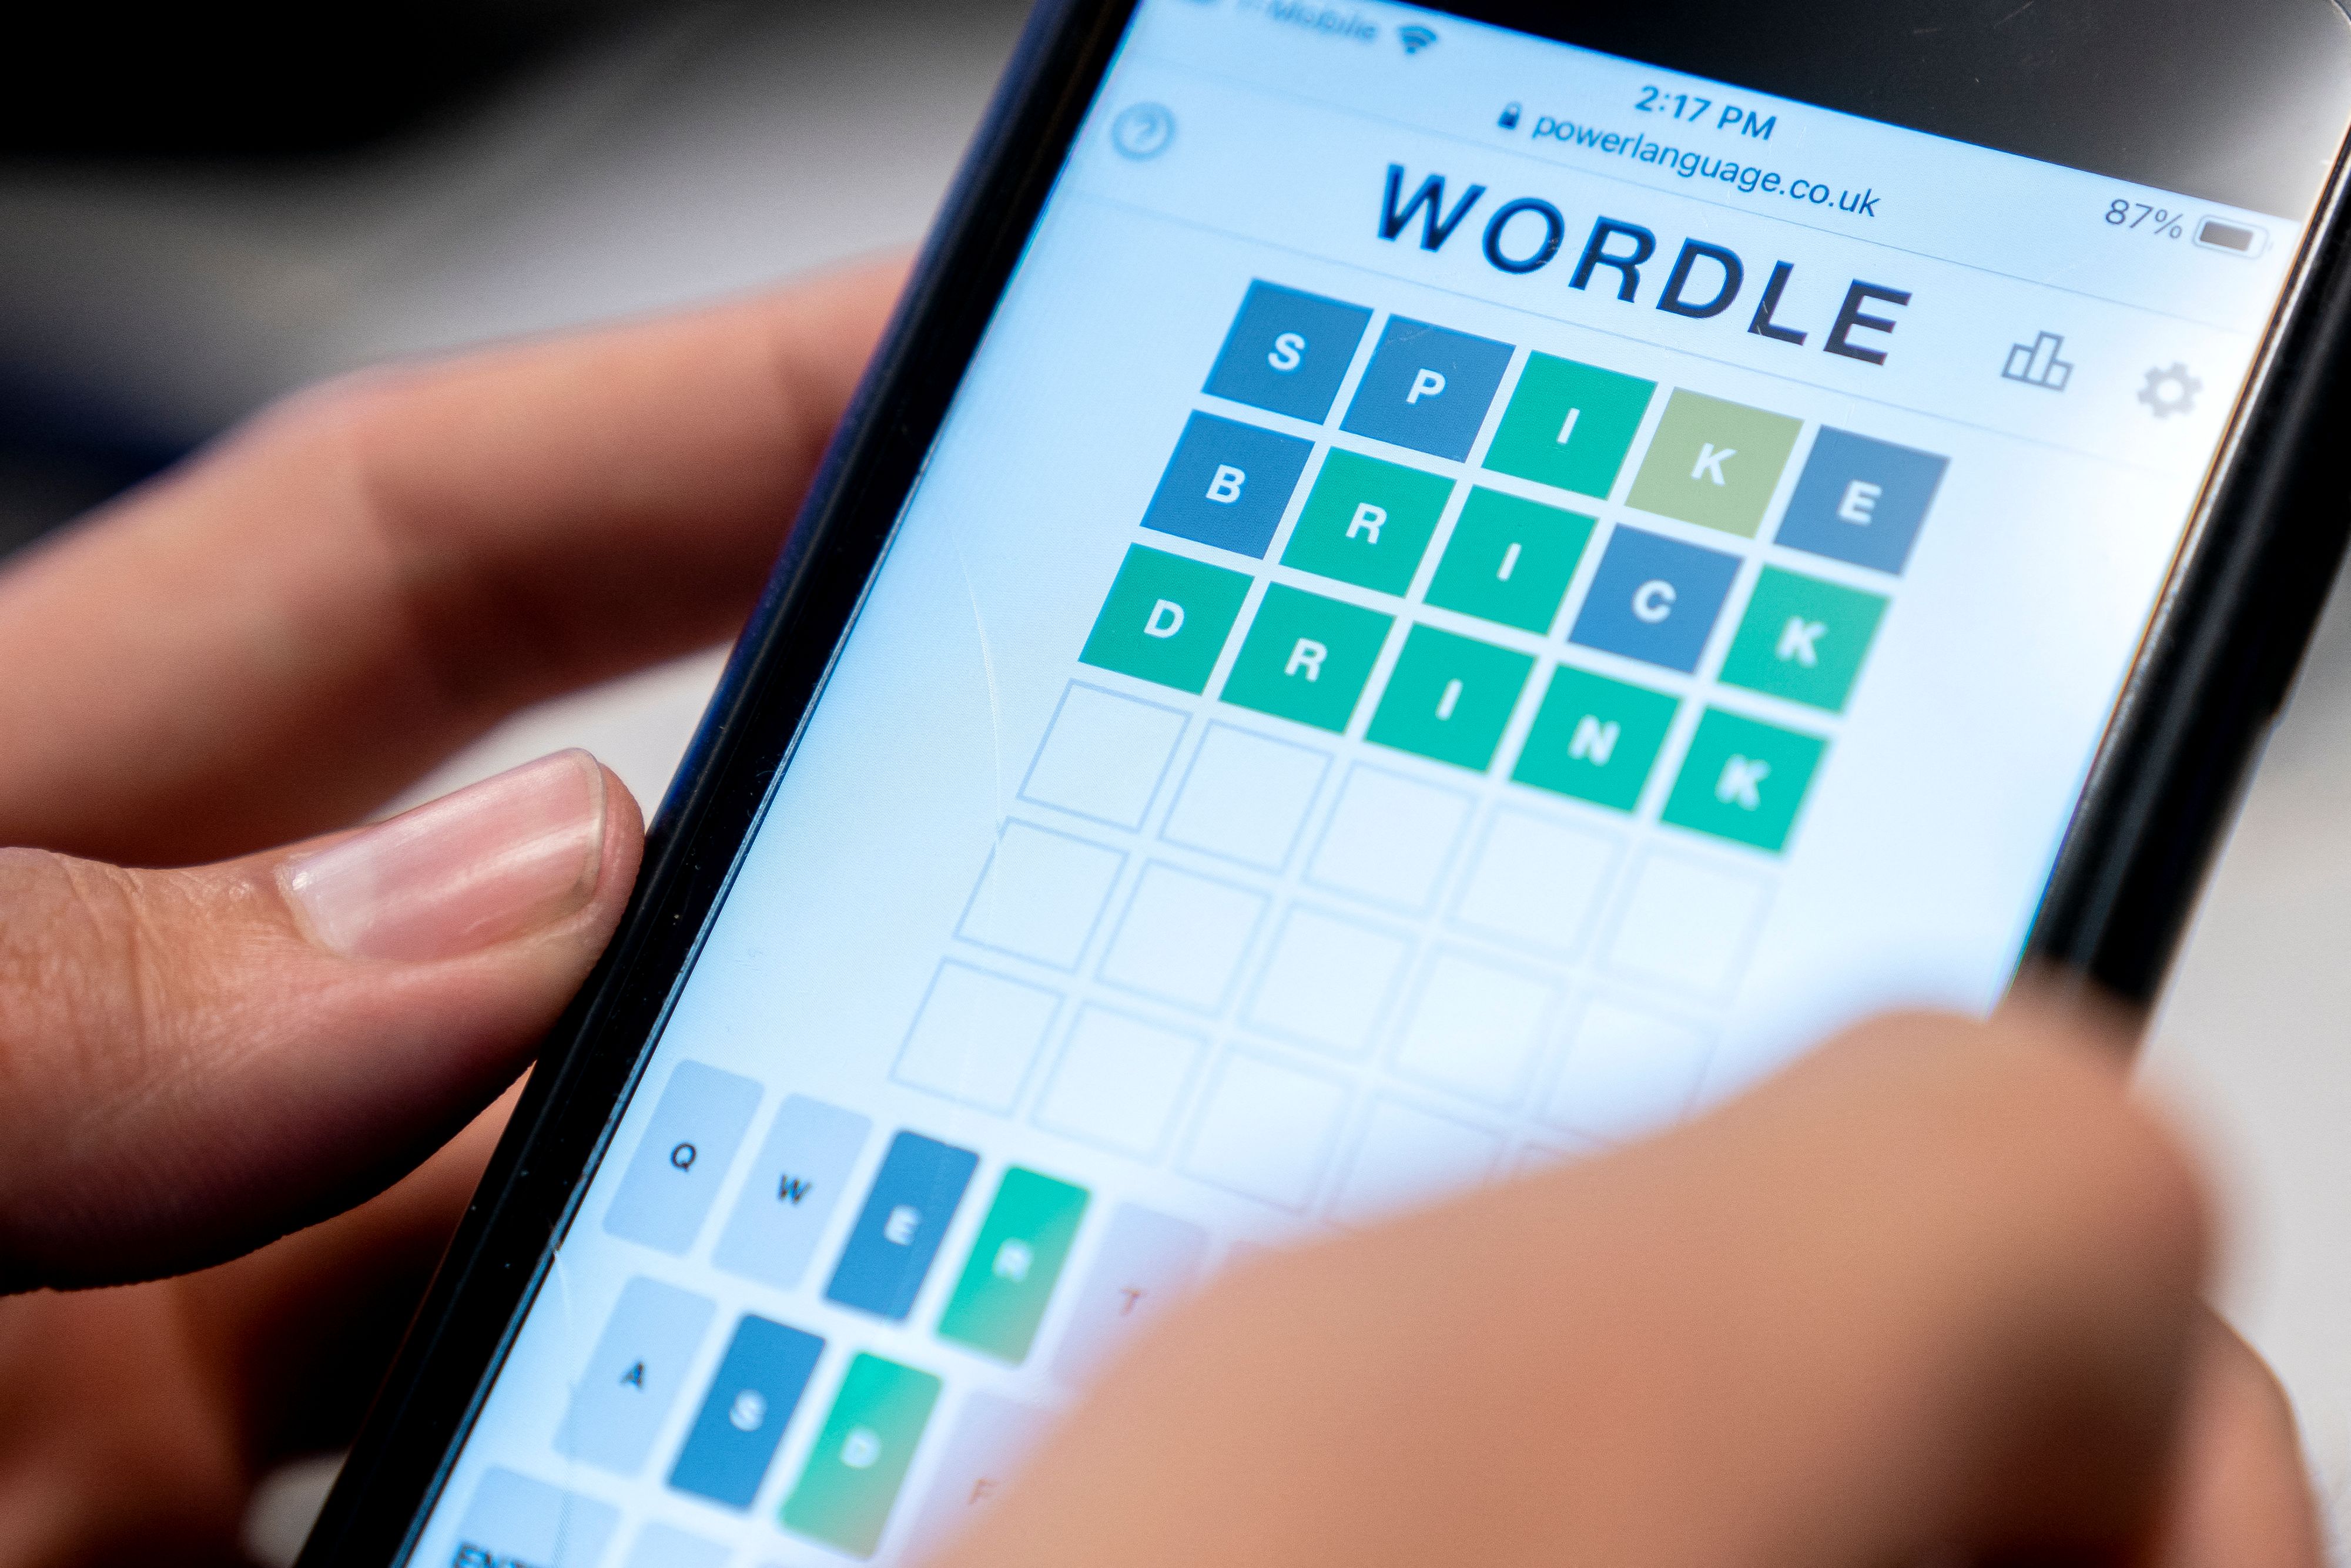 A person playing the online word game Wordle on a mobile phone.